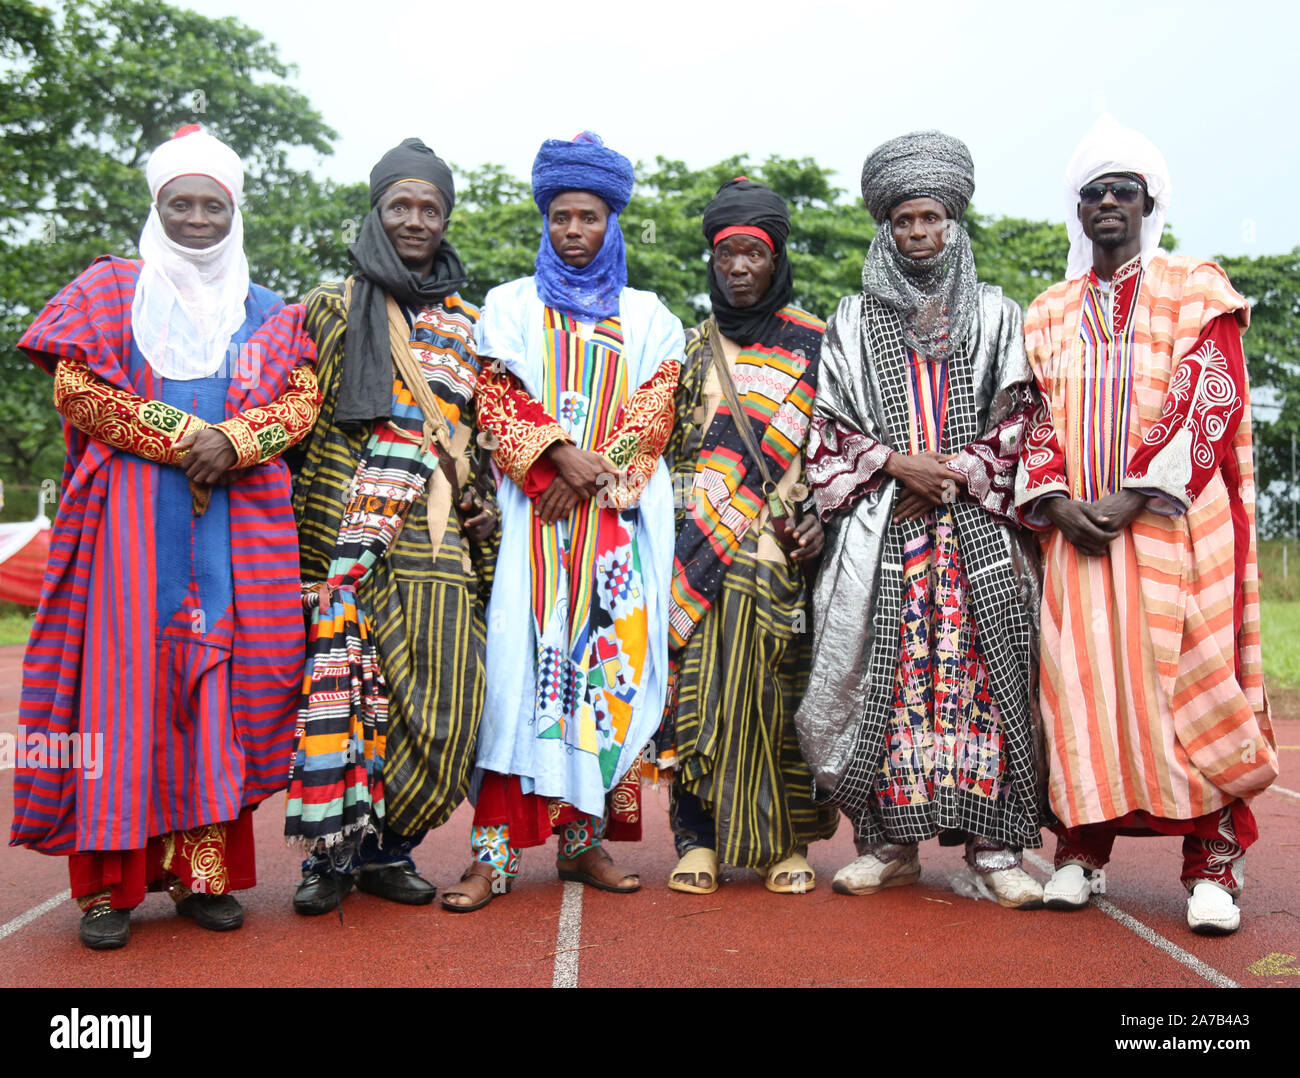 hausafulani-men-display-their-traditional-costumes-during-the-national-festival-for-arts-and-culture-nafest-in-edo-state-nigeria-2A7B4A3.jpg